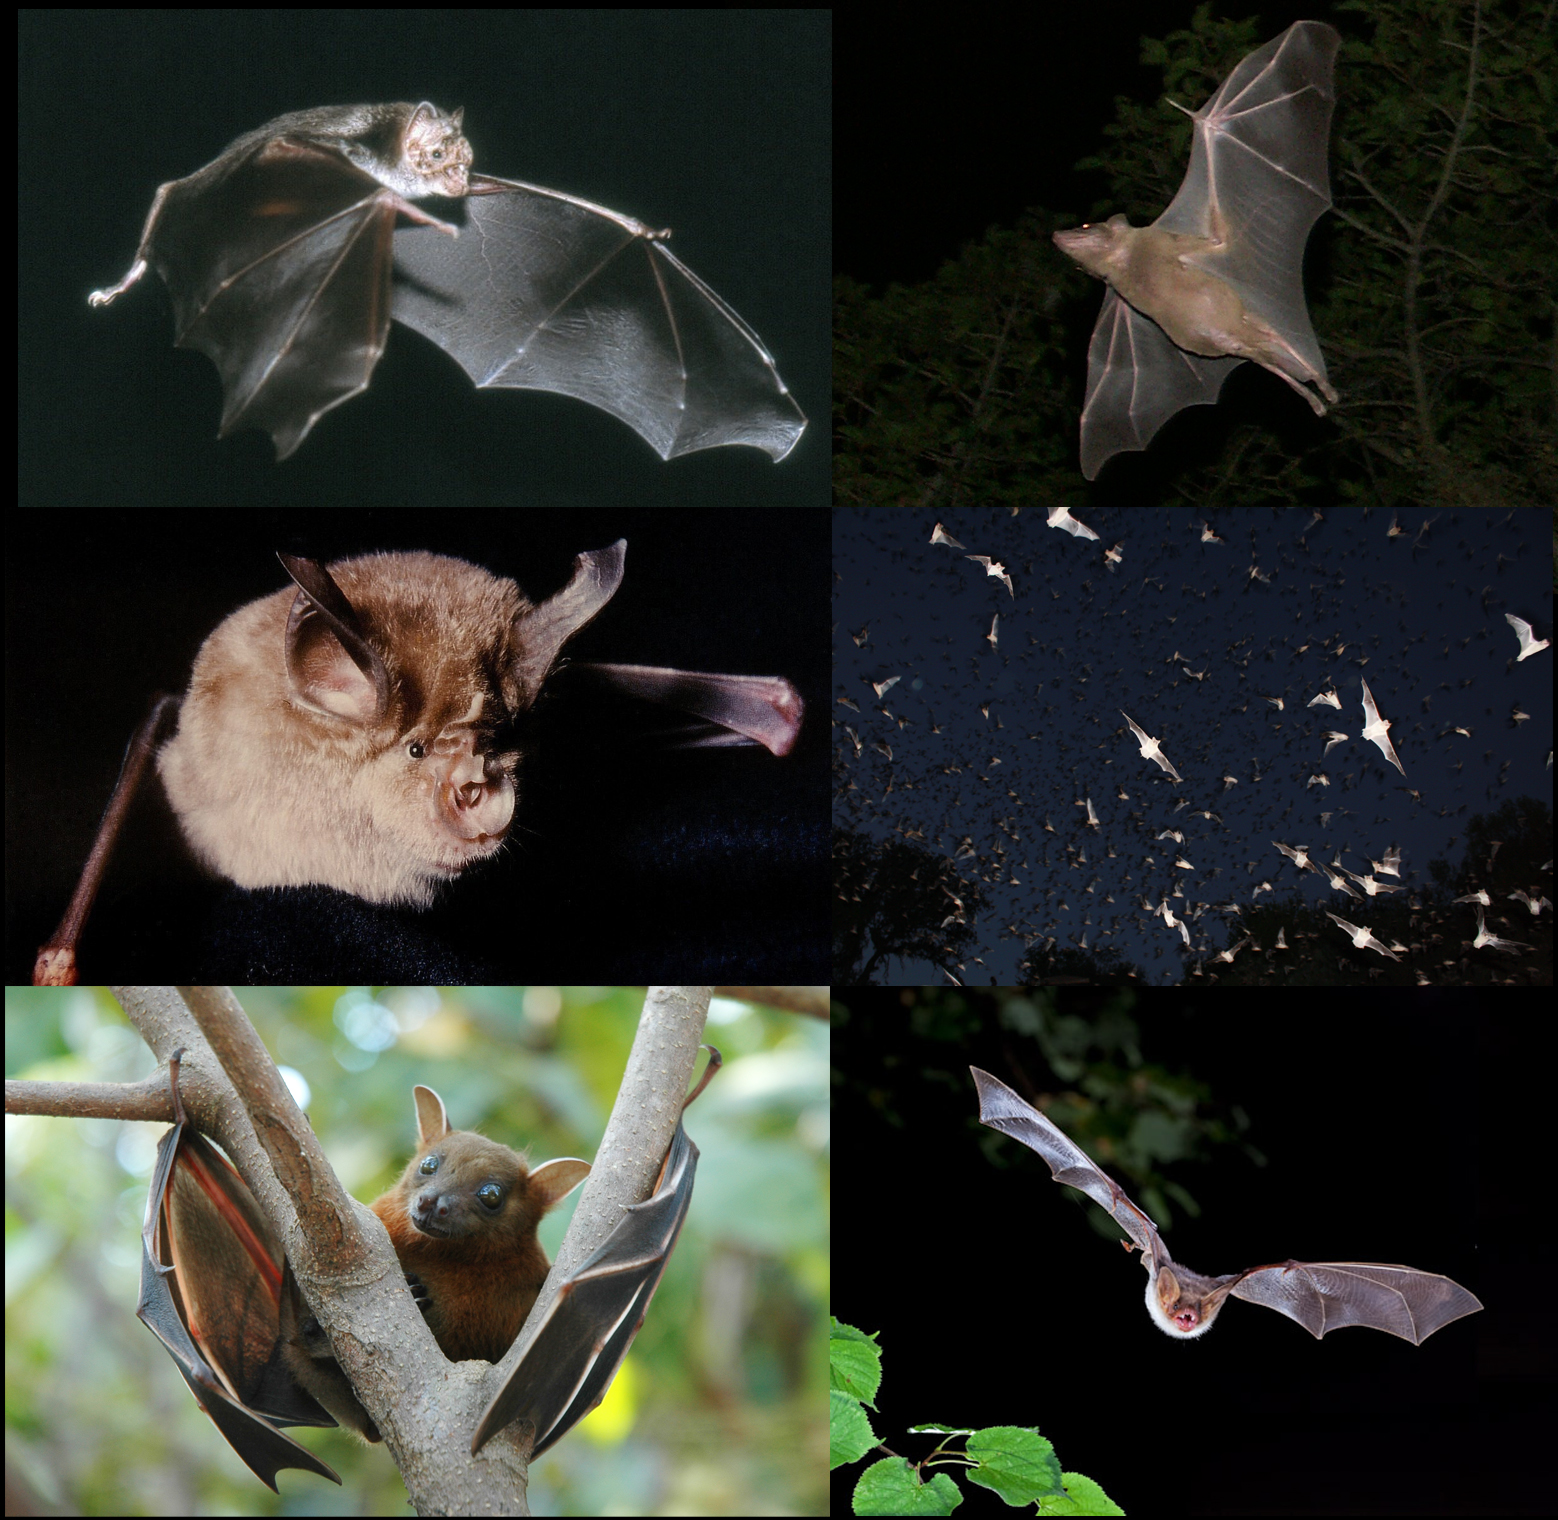 What animal category is a bat?